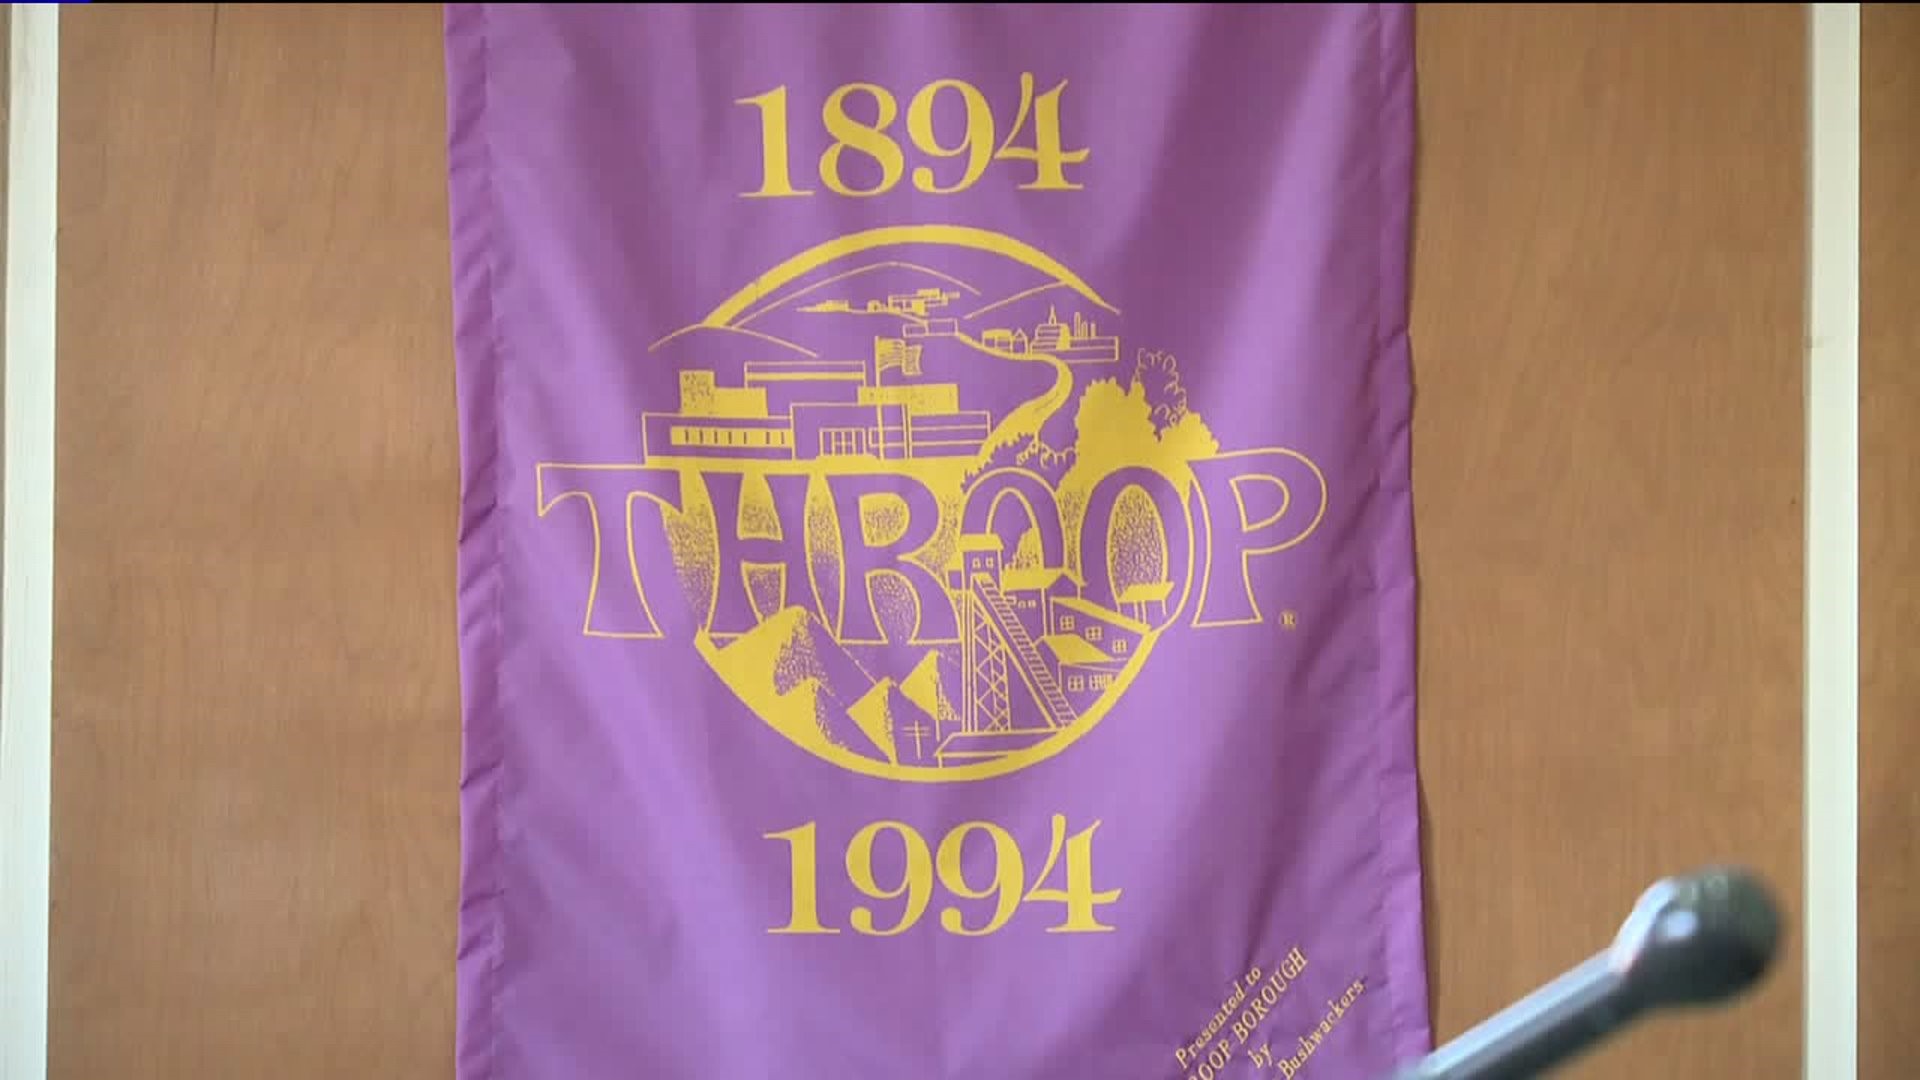 Throop Fights for its Own Identity, Borough Wants Own Individual ZIP Code